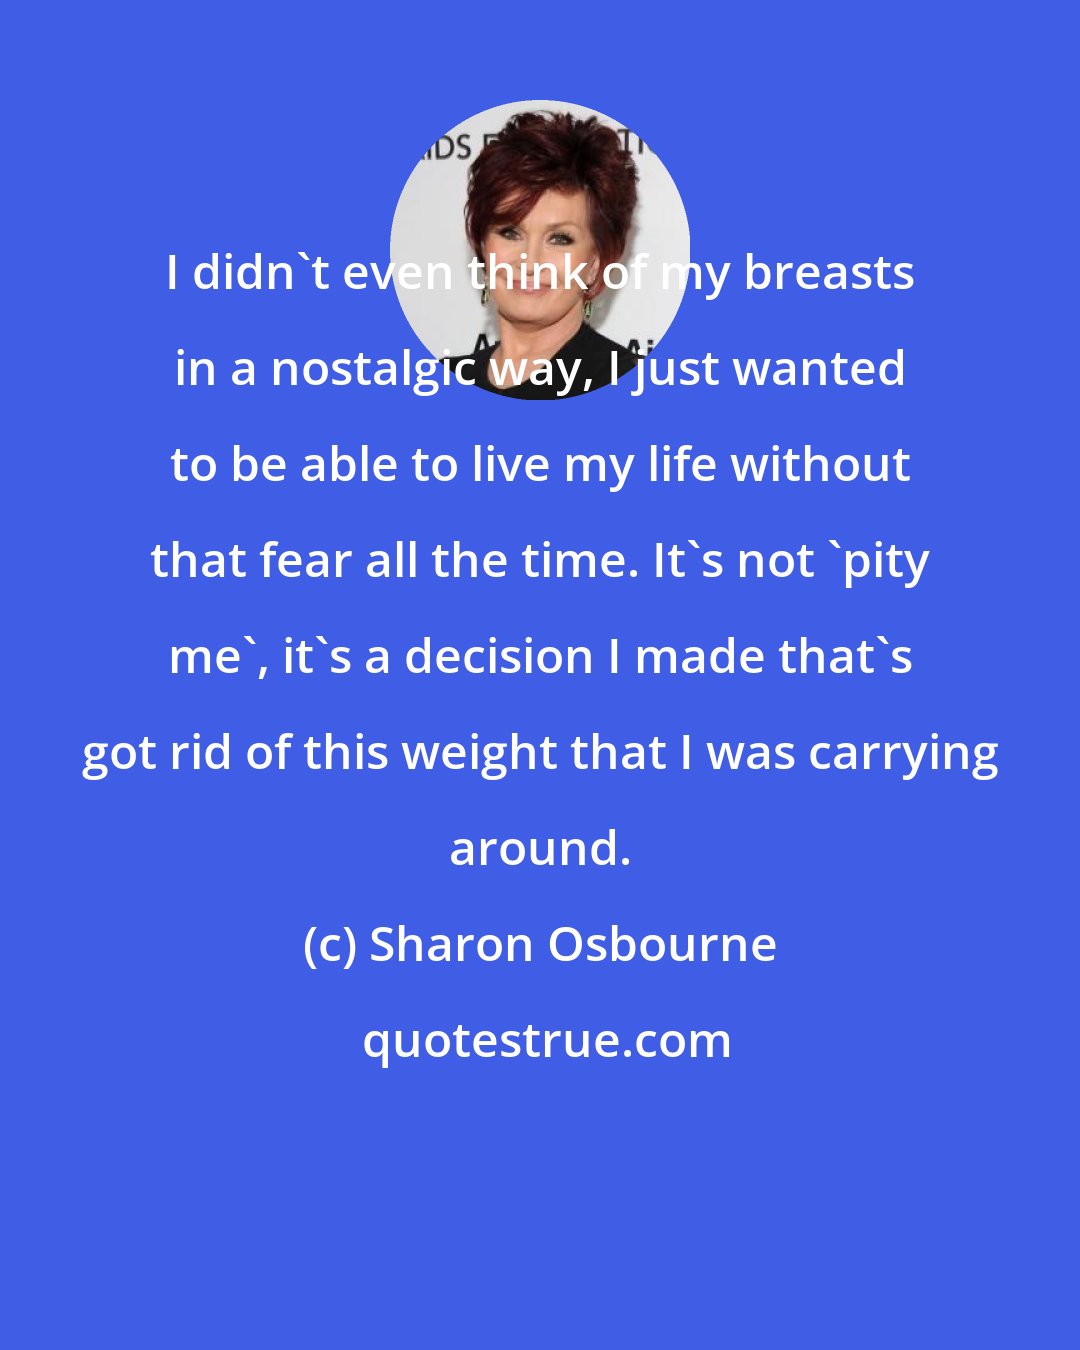 Sharon Osbourne: I didn't even think of my breasts in a nostalgic way, I just wanted to be able to live my life without that fear all the time. It's not 'pity me', it's a decision I made that's got rid of this weight that I was carrying around.